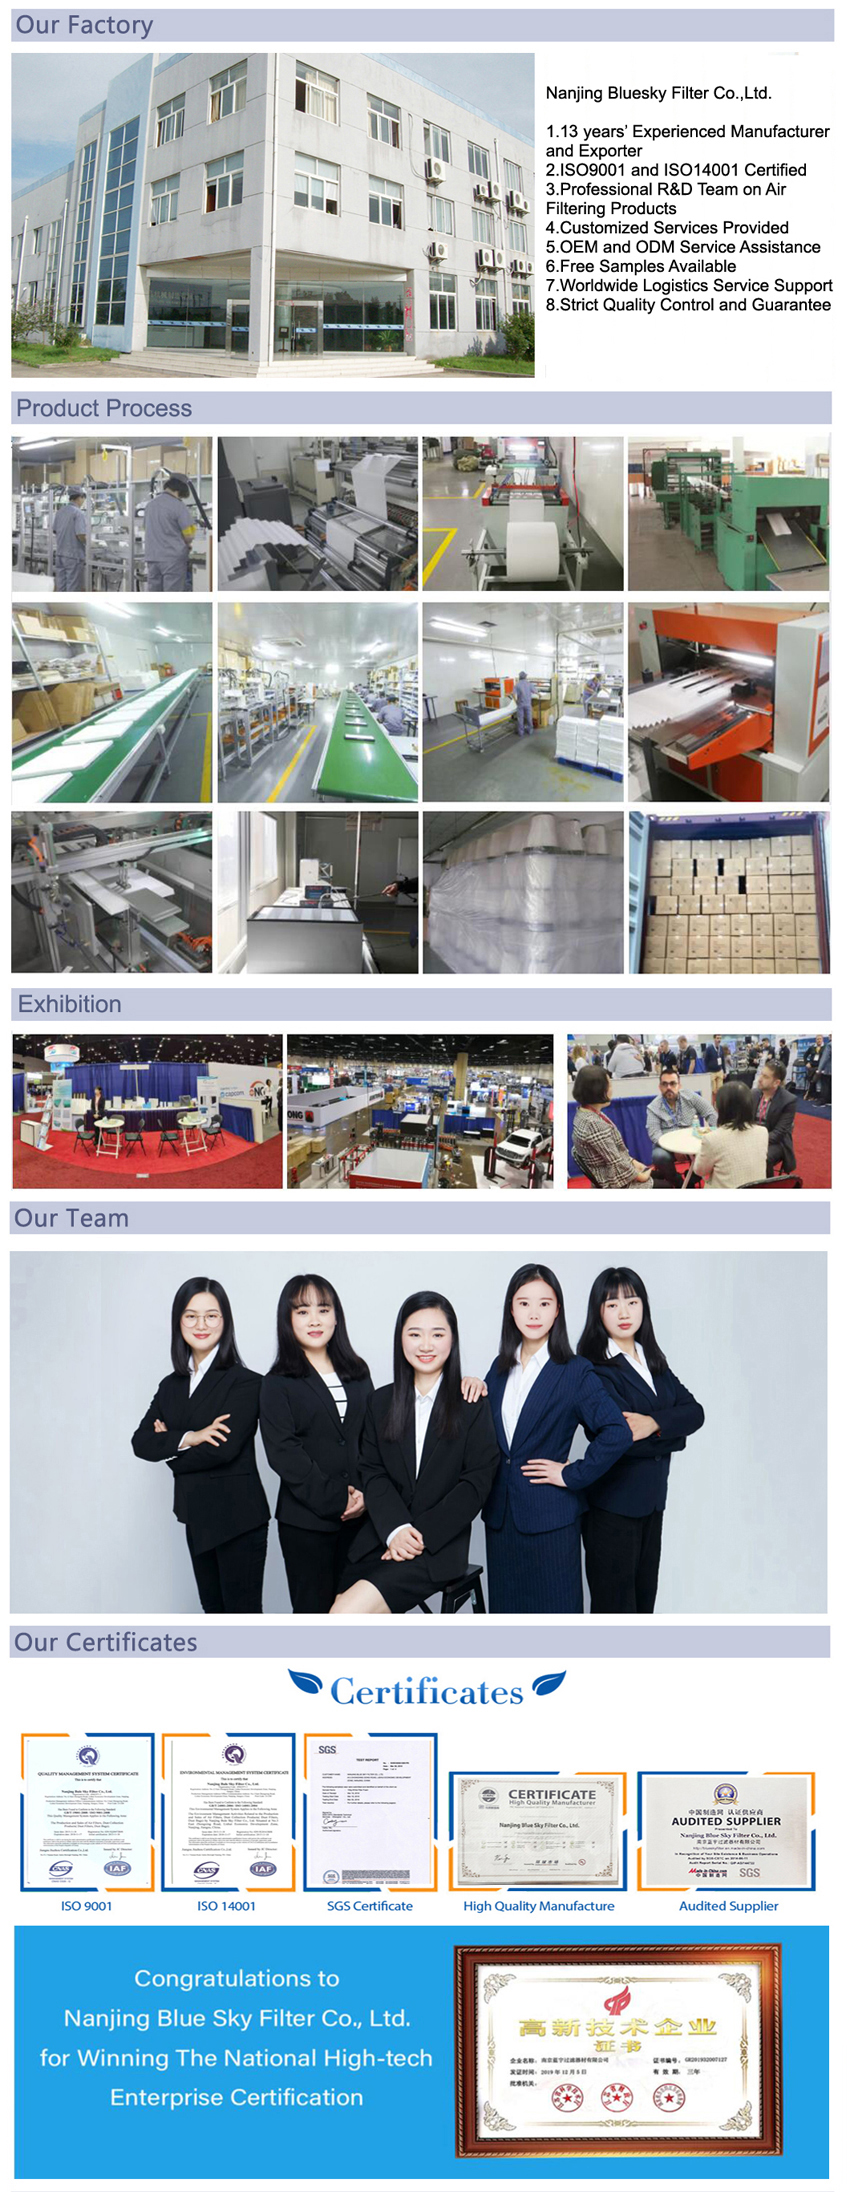 Our Company of White Filters